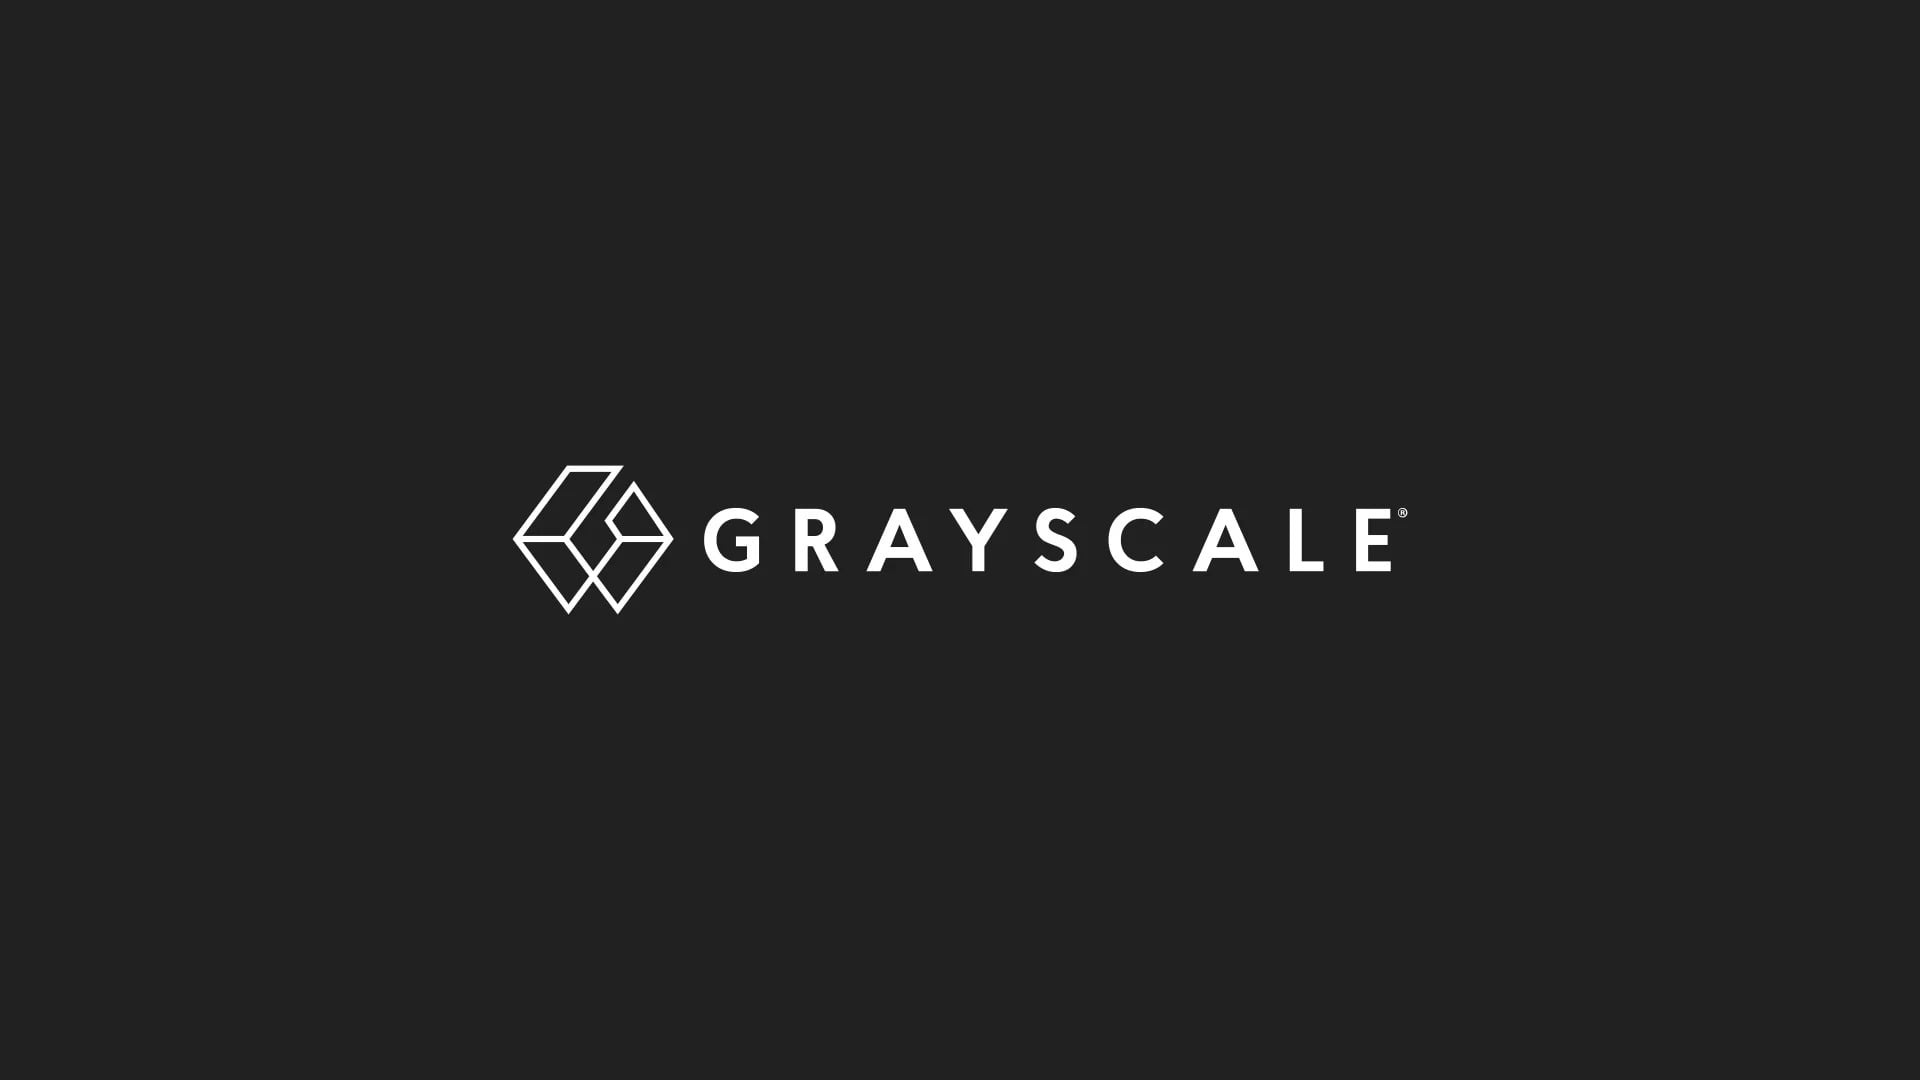 The GBTC and ETHE products from Grayscale are now accessible on Robinhood.